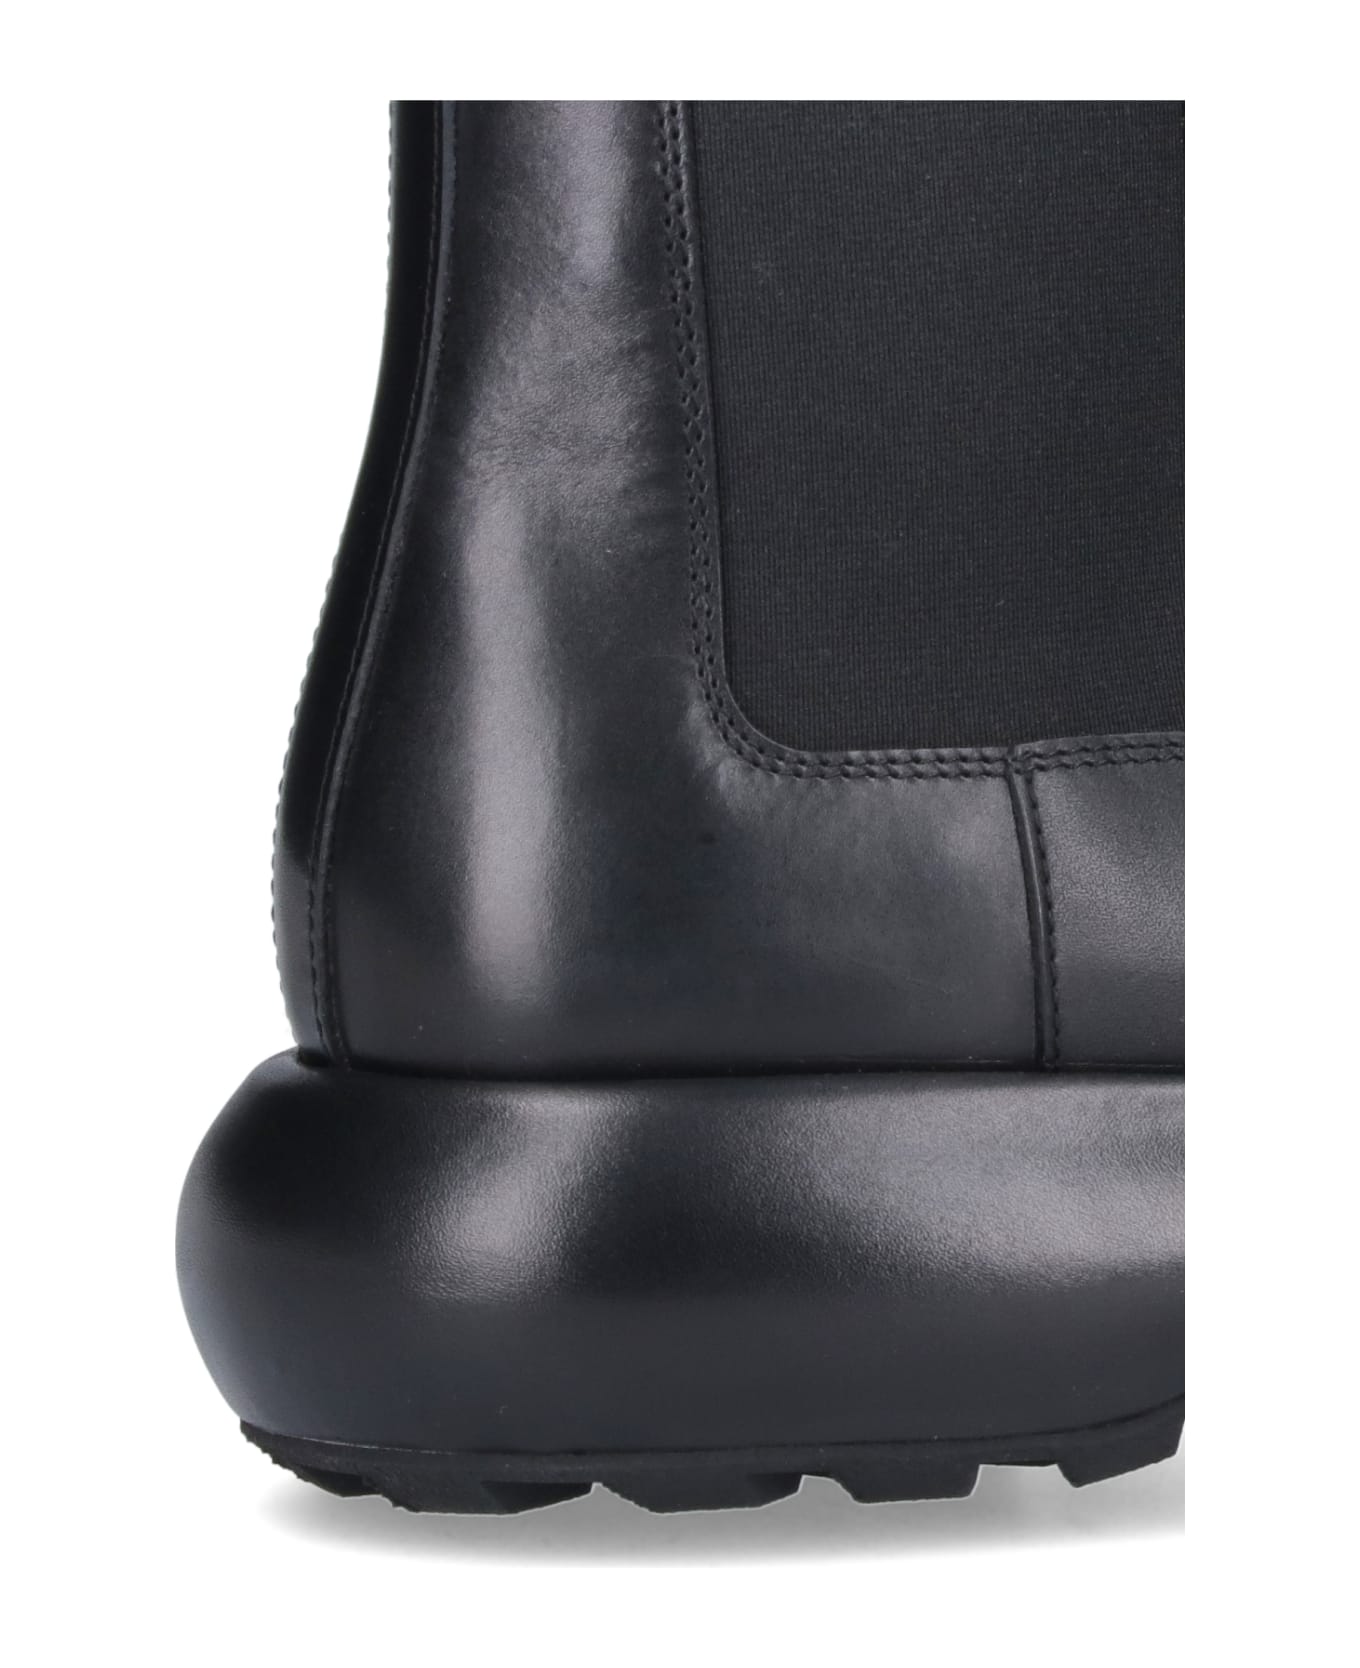 Jil Sander Chelsea Ankle Boots - 001 ブーツ